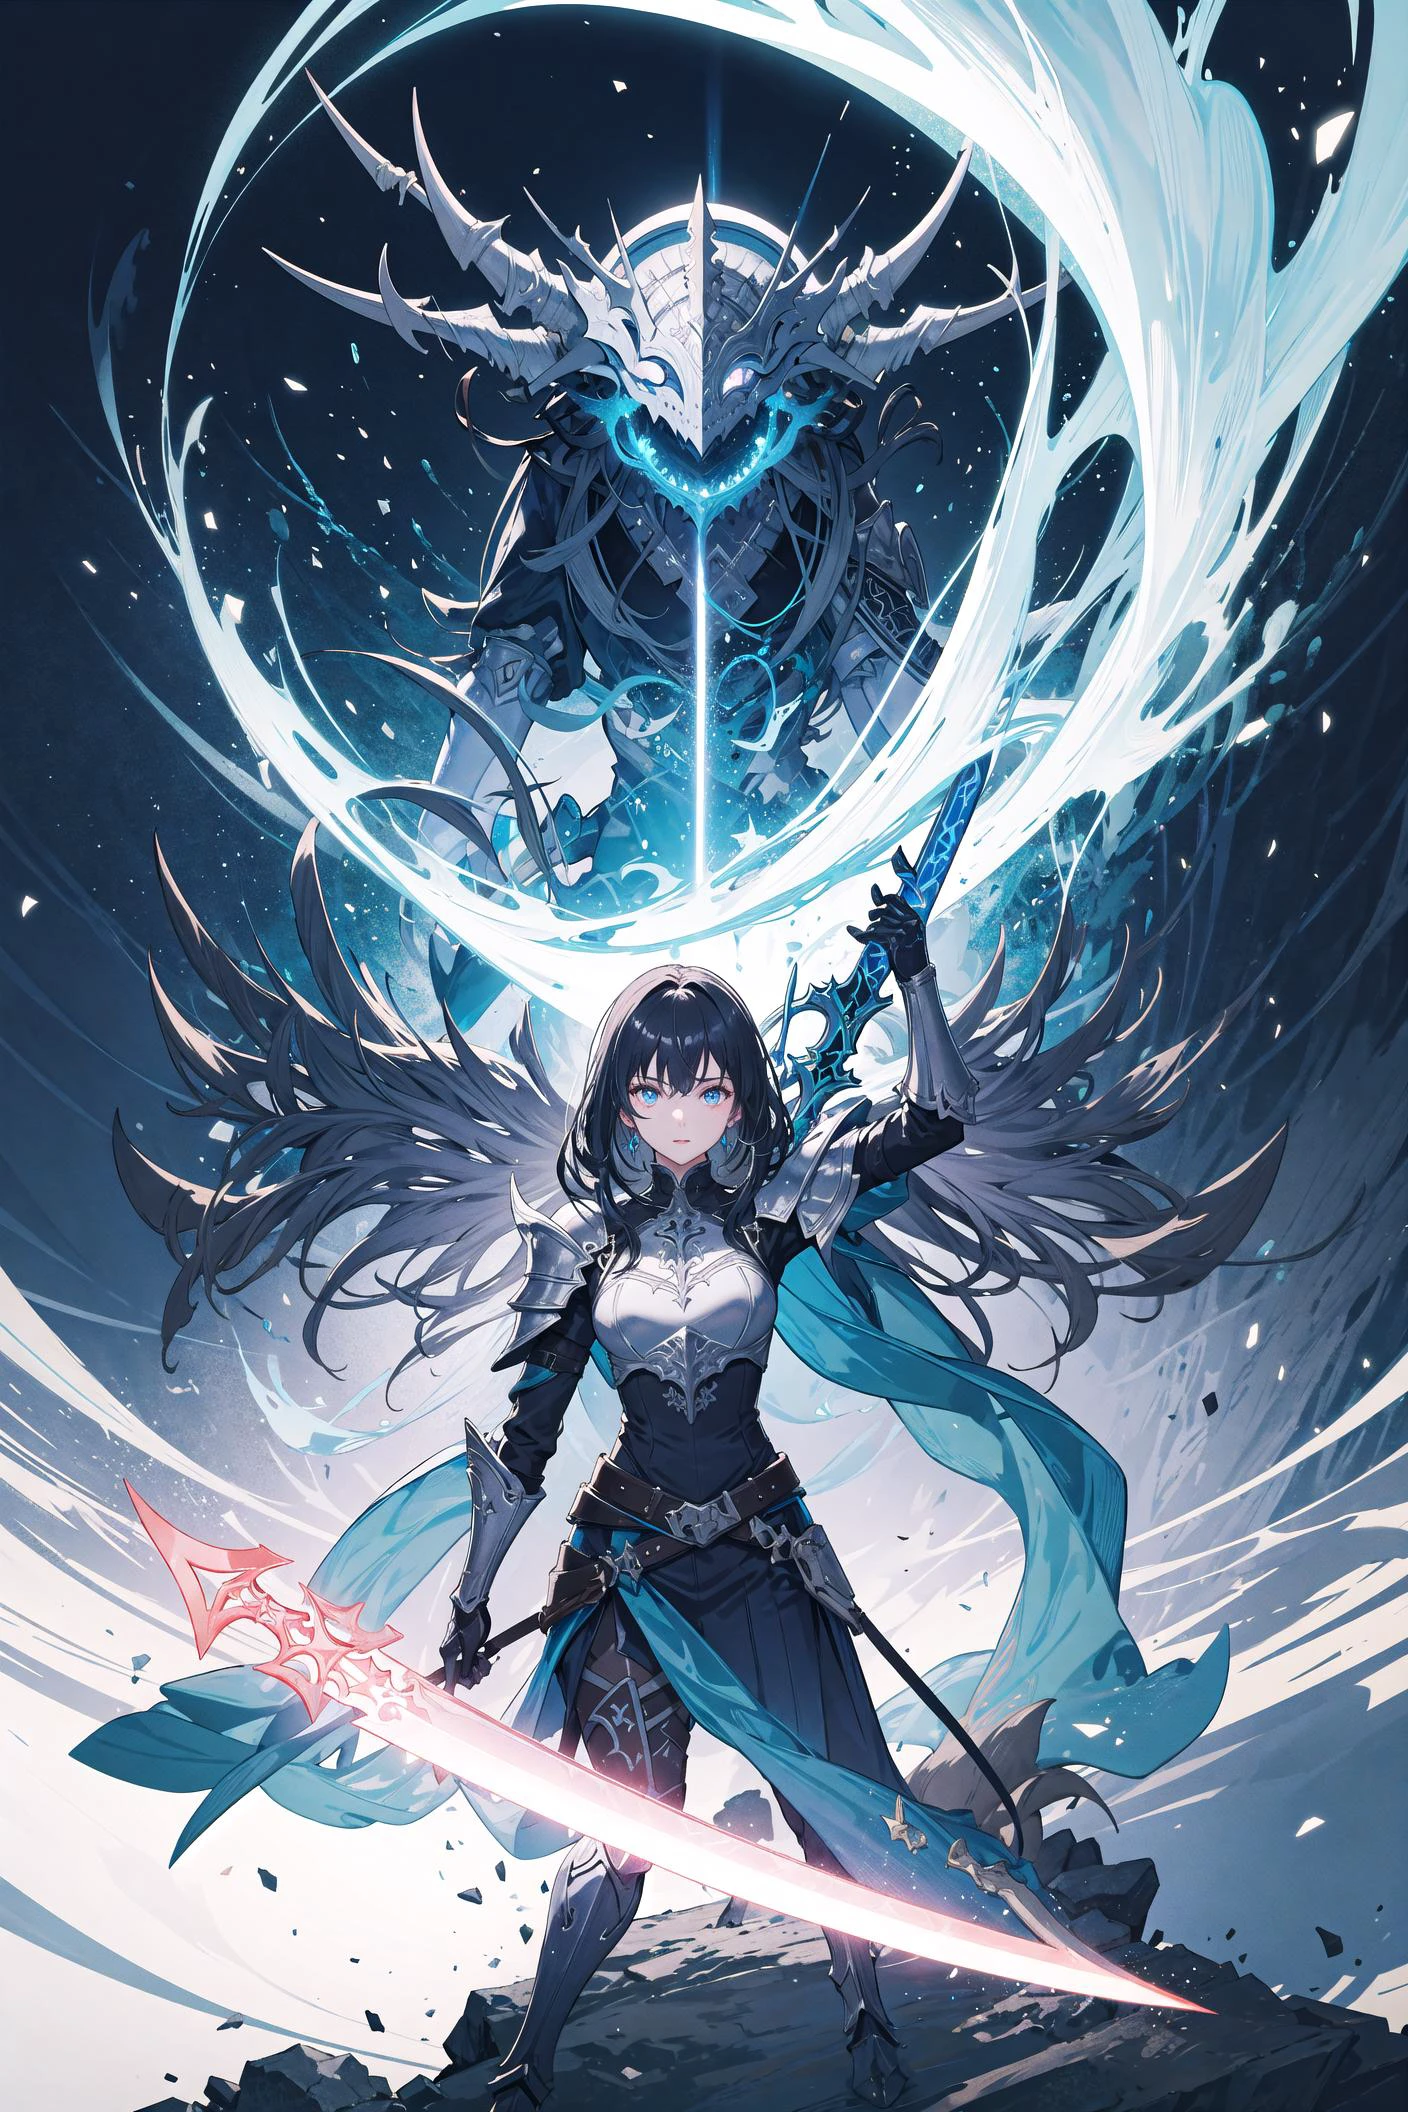 fantasy, epic, movie poster-style illustration, a girl standing in armor, with a dynamic and magical background, featuring prominent and well-designed typography elements,standing, confident, determined, wielding a sword, epic title, magical forest, glowing runes, bold text